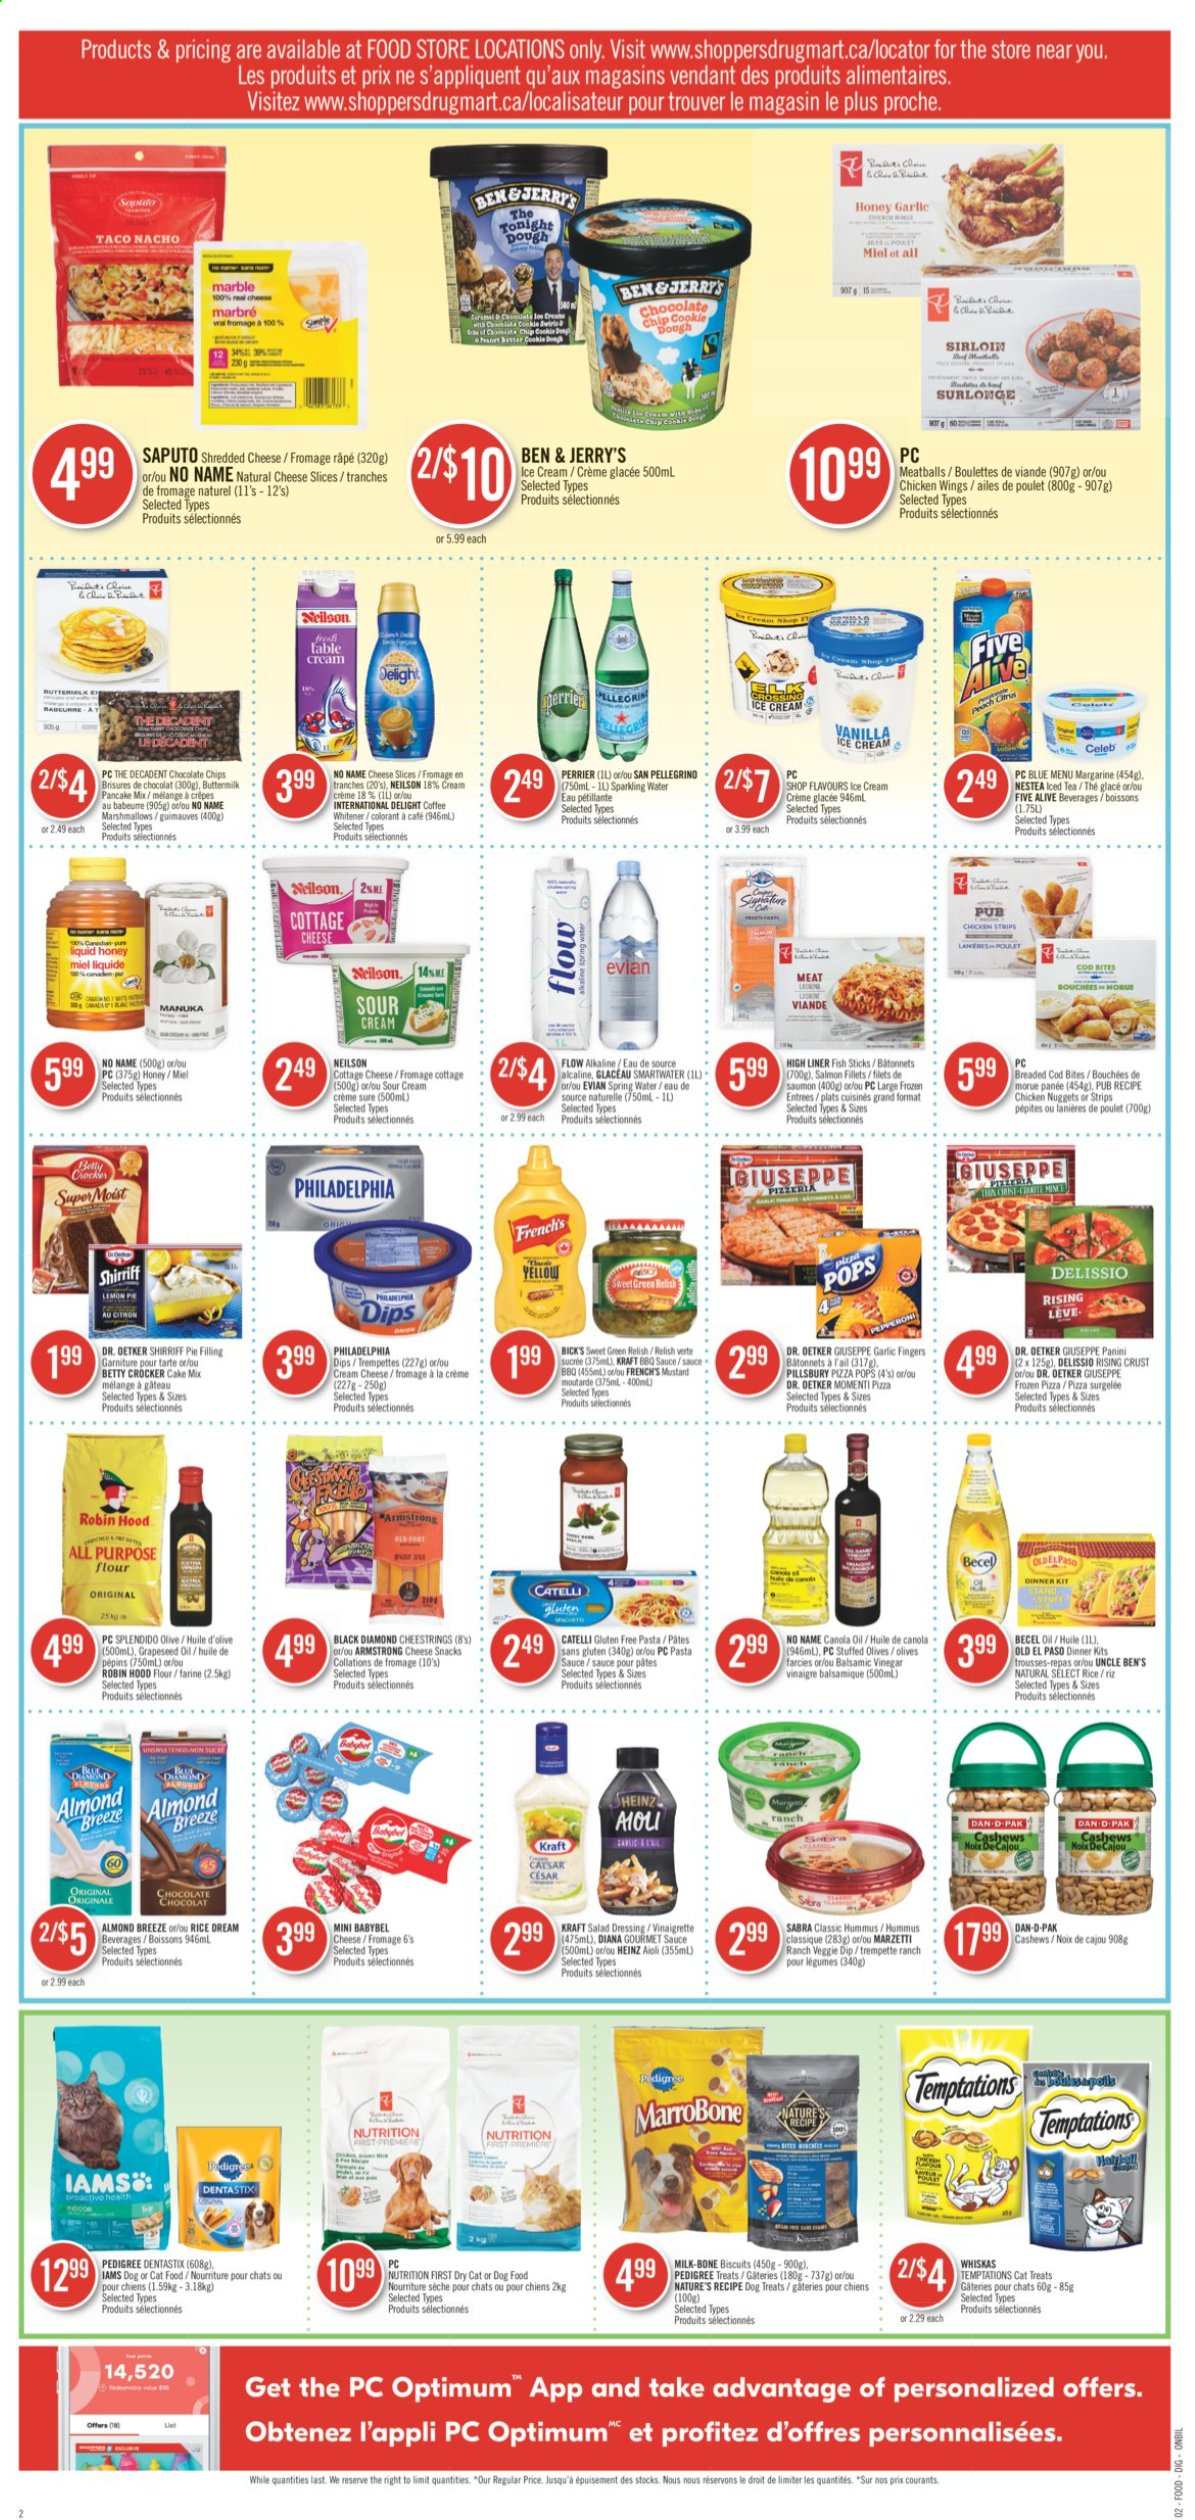 thumbnail - Shoppers Drug Mart Flyer - July 31, 2021 - August 06, 2021 - Sales products - marshmallows, snack, biscuit, all purpose flour, pie filling, pancakes, Dr. Oetker, garlic, Heinz, pasta sauce, Old El Paso, Uncle Ben's, BBQ sauce, mustard, salad dressing, vinaigrette dressing, dressing, Kraft®, balsamic vinegar, canola oil, oil, grape seed oil, honey, cashews, ice tea, Perrier, spring water, sparkling water, Smartwater, Evian, San Pellegrino, coffee, Sure, bra, olives. Page 6.